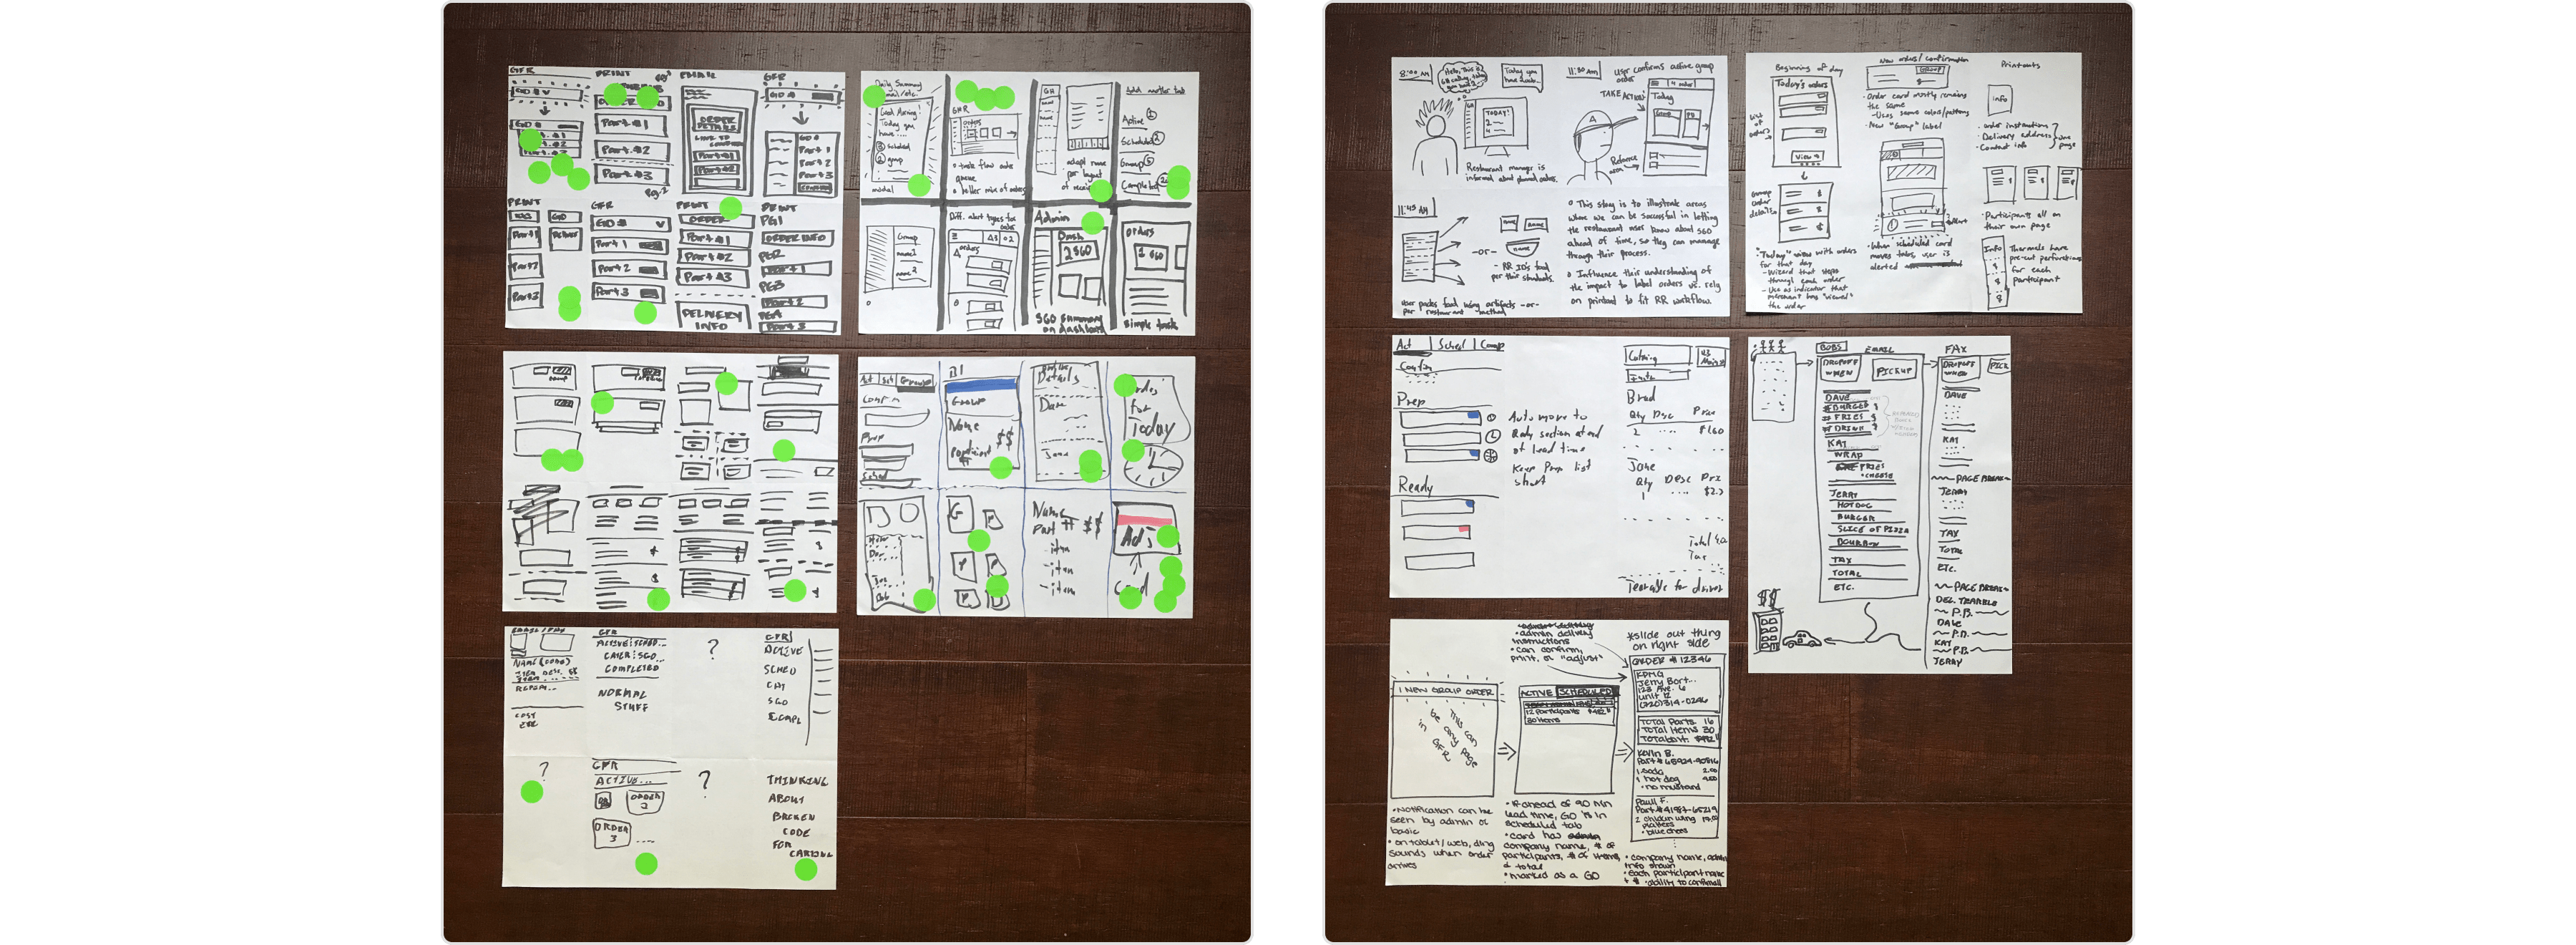 Photos of exercises from day 2 of our design sprint